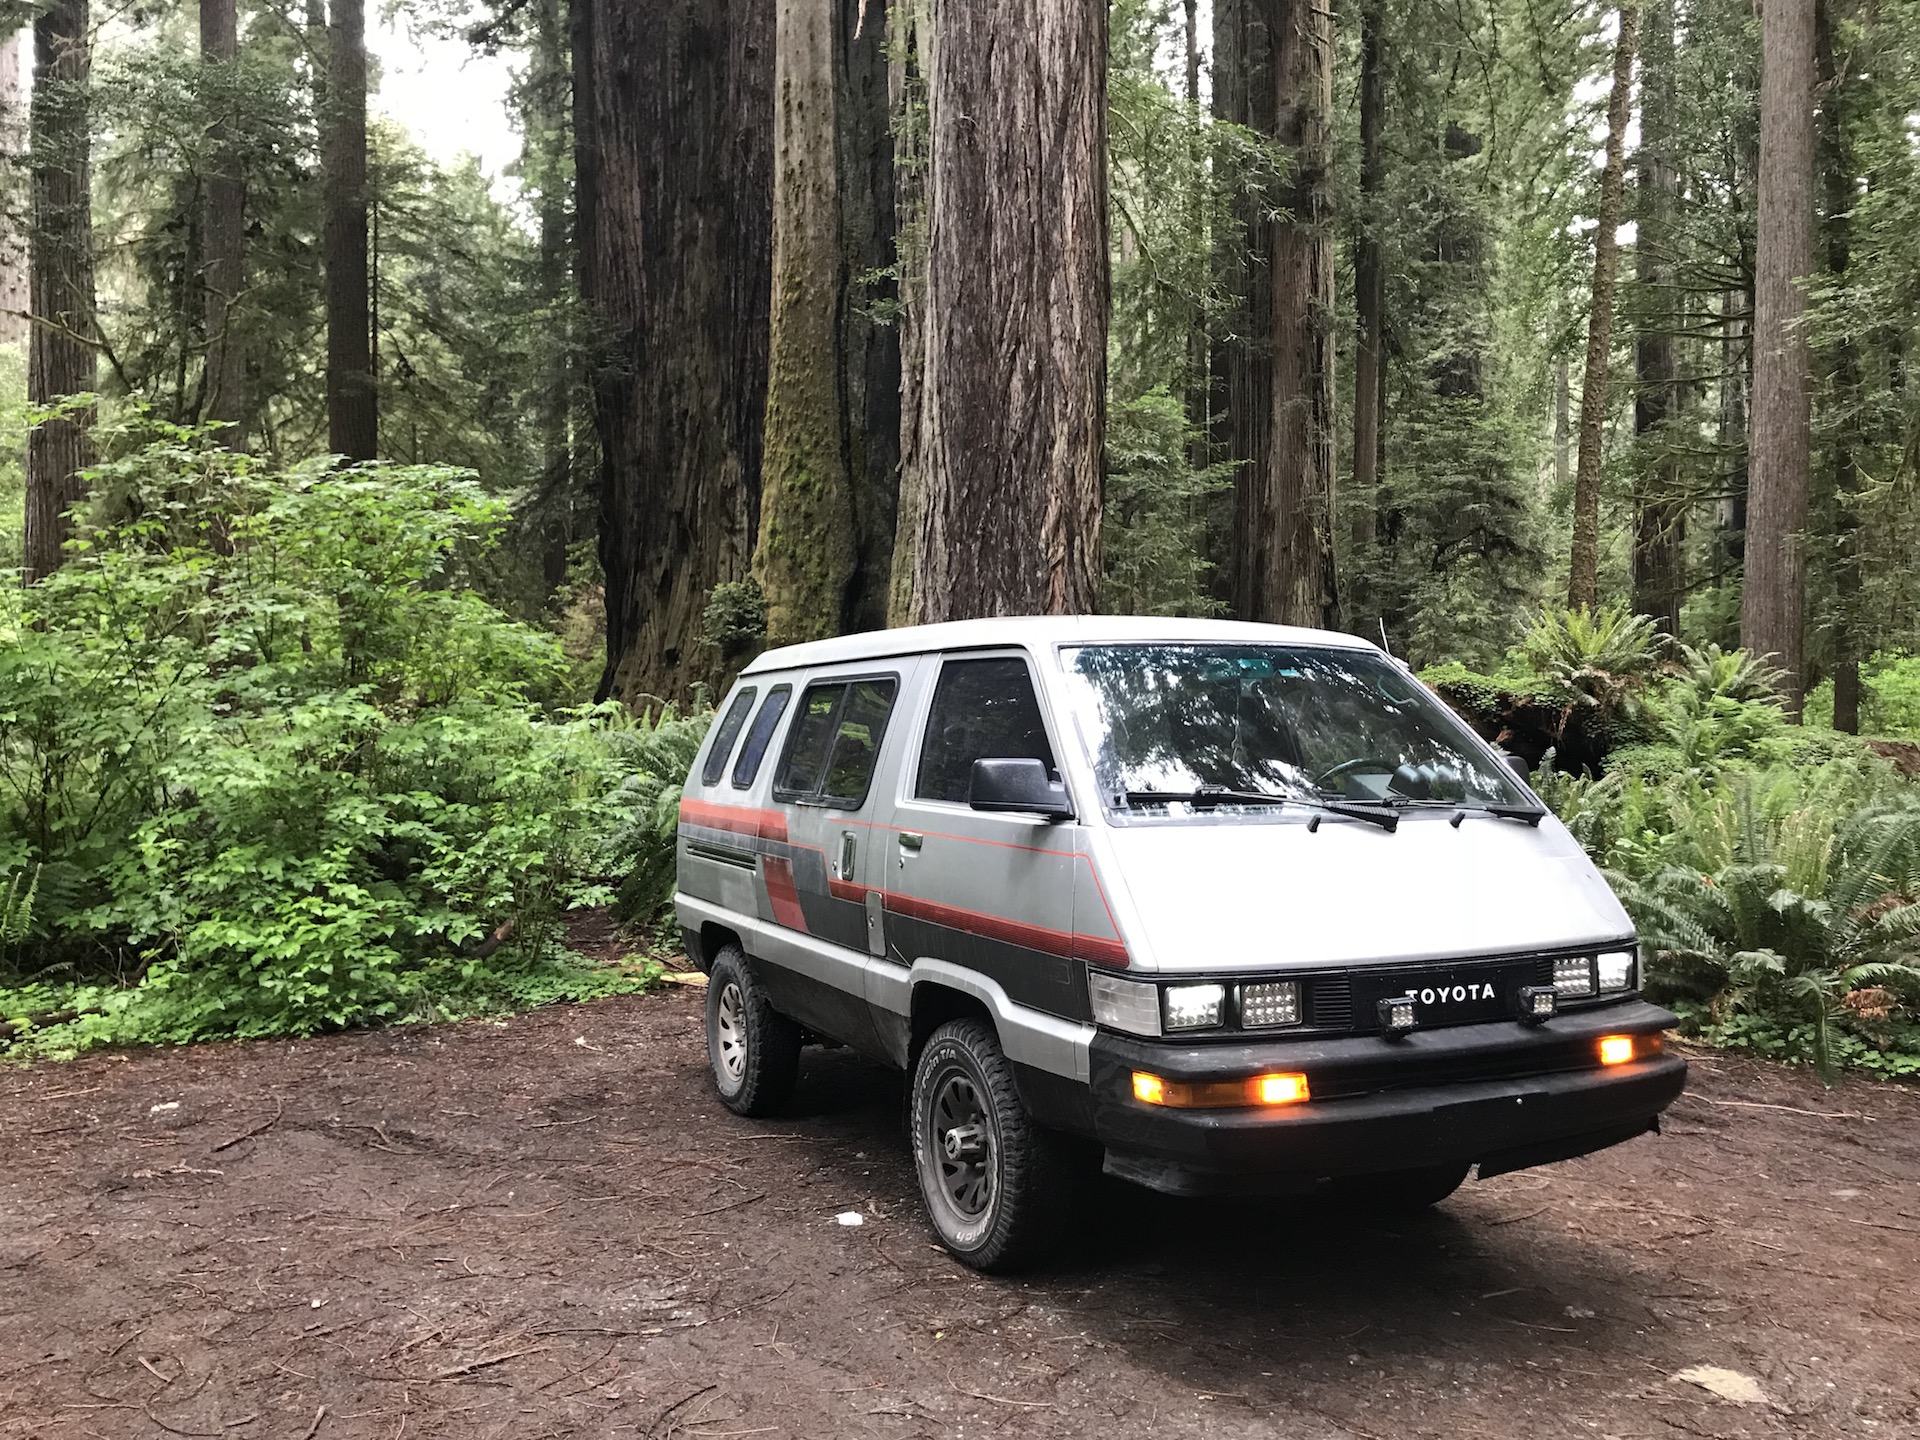 The Van at redwoods state and national parks